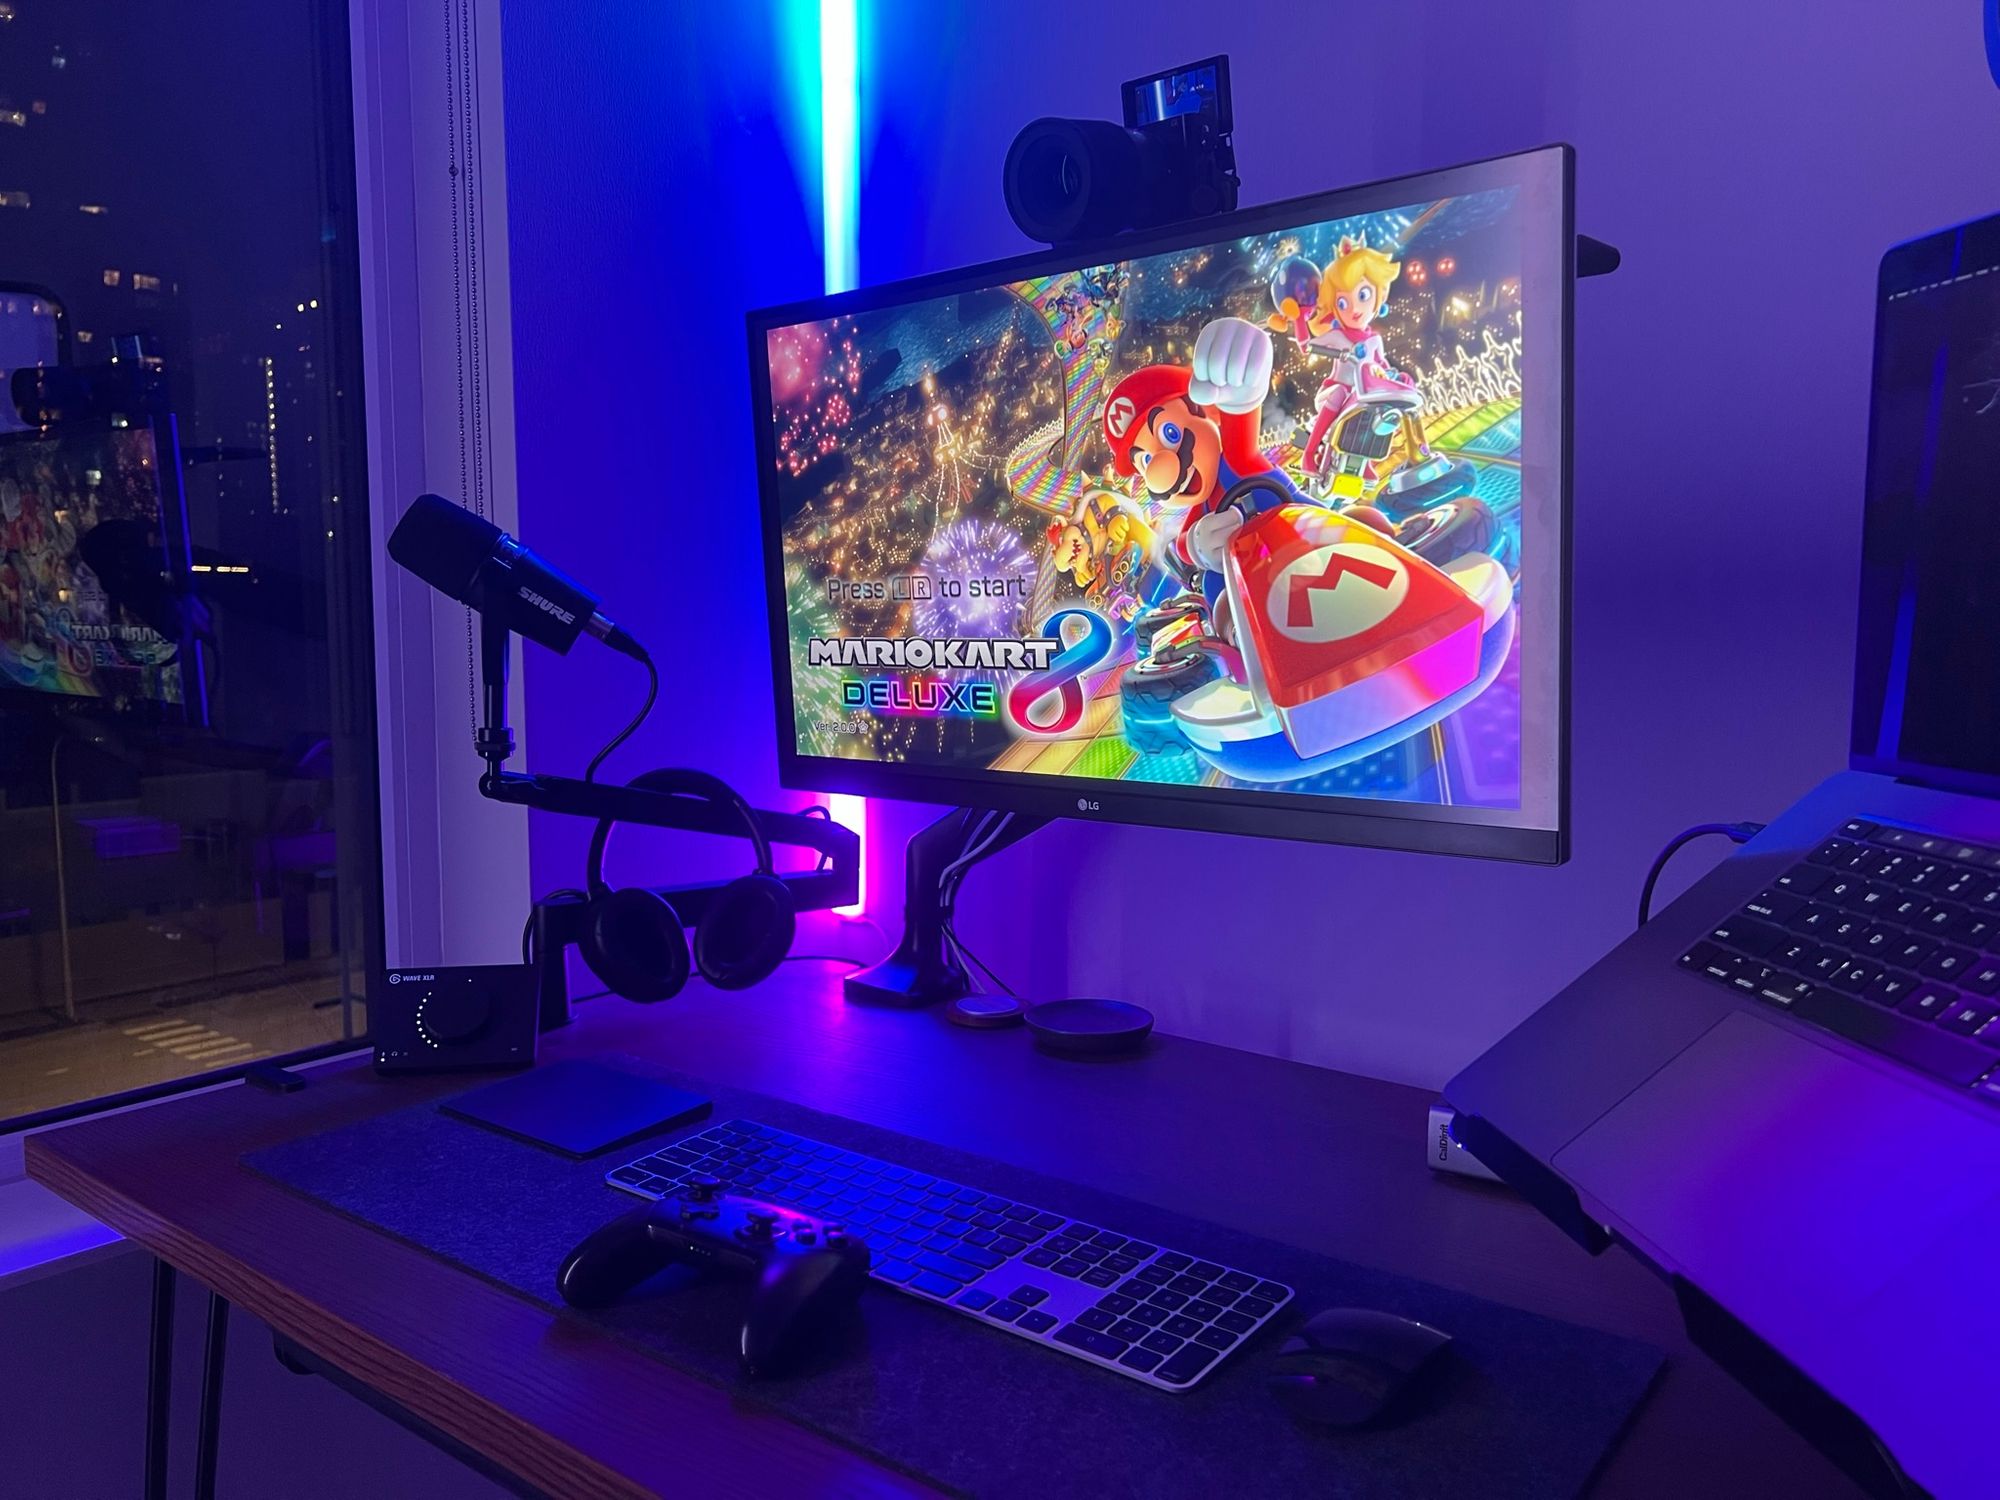 A view of the desk at night with a Nintendo Switch controller in front of the keyboard and Mario Kart displayed on the monitor.